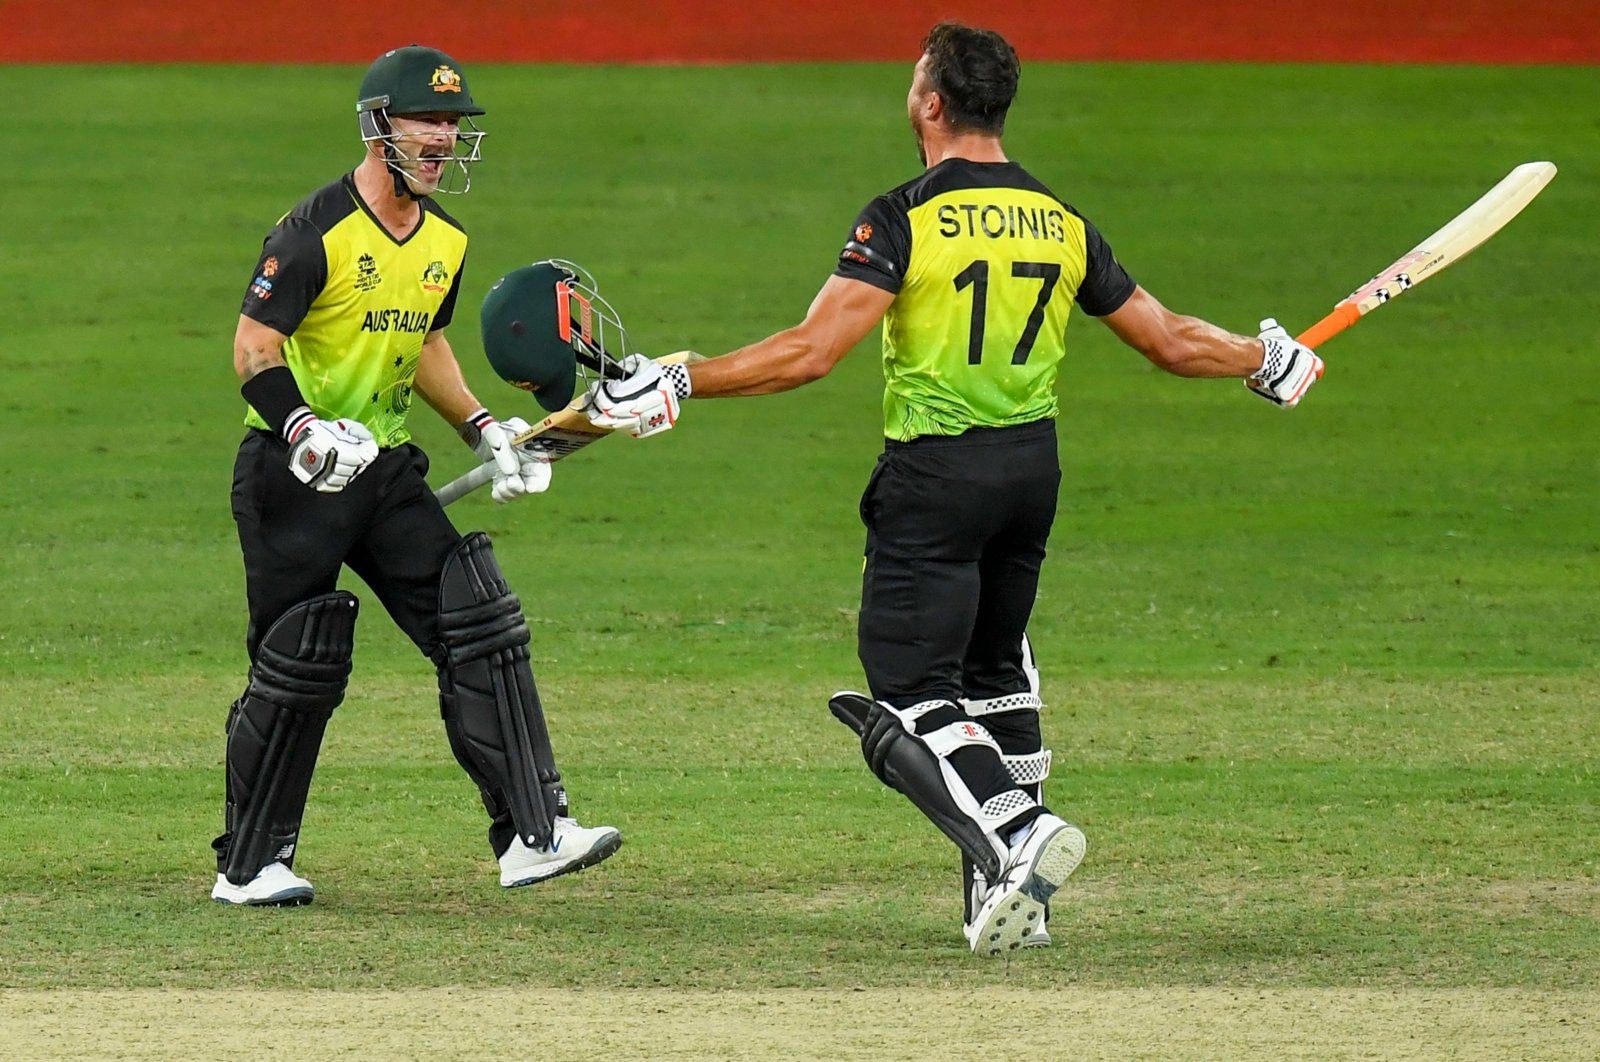 Australia's Marcus Stoinis (R) and Matthew Wade celebrate their victory at the end of the ICC men's T20 World Cup semifinal match against Pakistan in Dubai, UAE, Nov. 11, 2021. (AFP Photo)